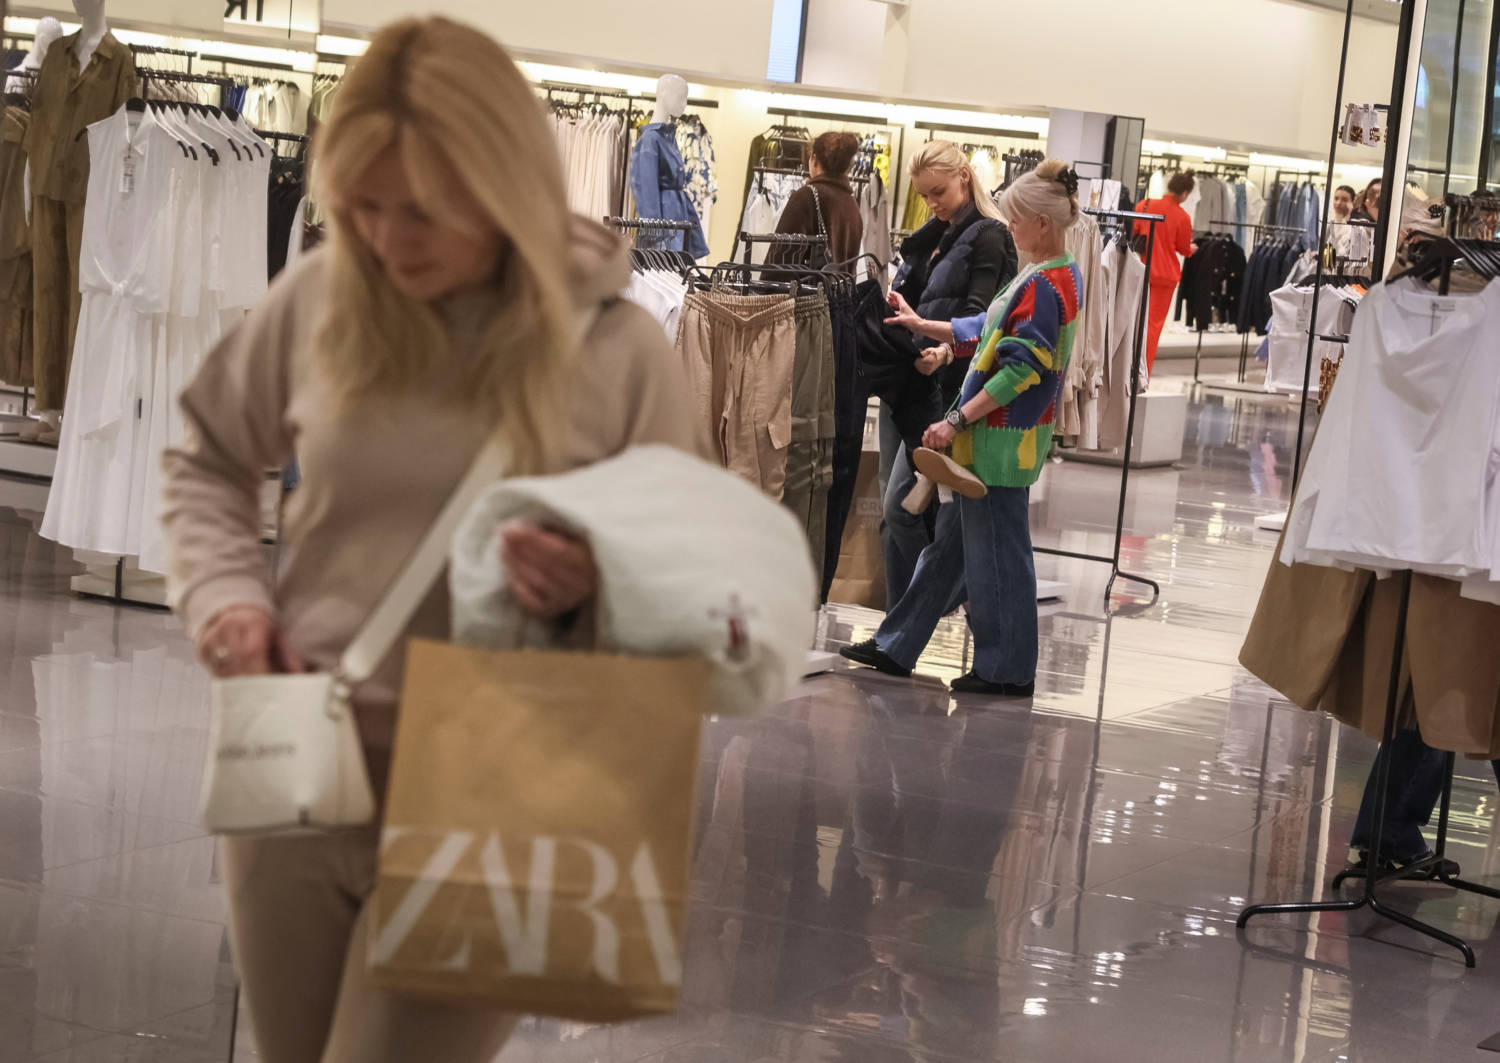 Shoppers Visit A Zara Store In A Shopping Mall In Kyiv